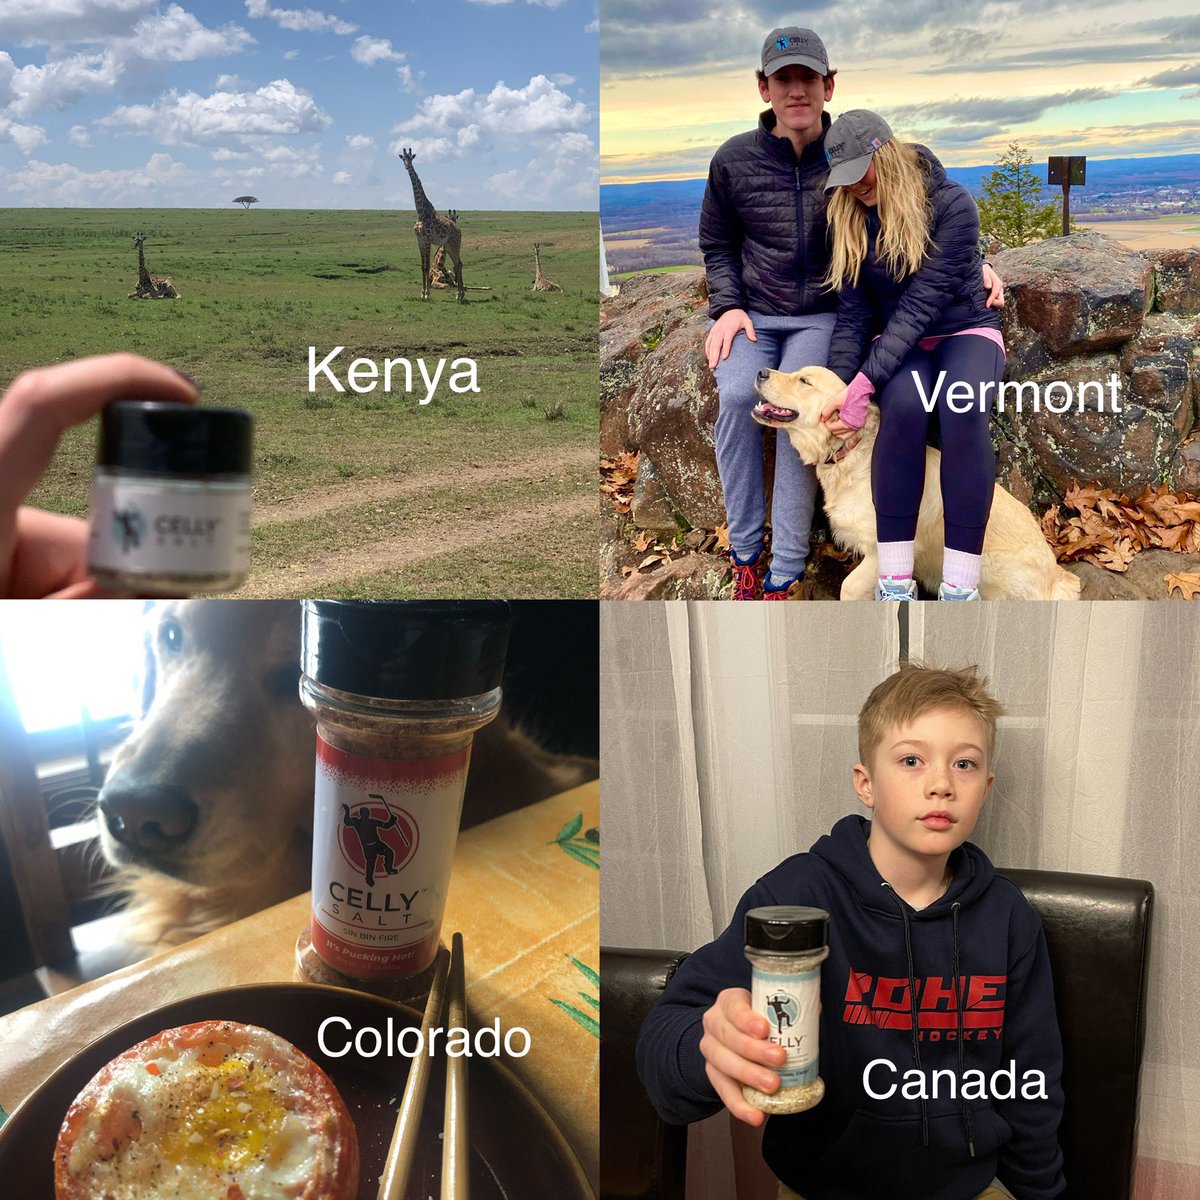 Celly Salt is Global.🌎

cellysalt.com

#cellysalt #wordwide #kidapproved #healthy #healthyfood #healthylifestyle #fishing #walkerscay #hockey #nhl #hockeymom #womanownedbusiness #camping